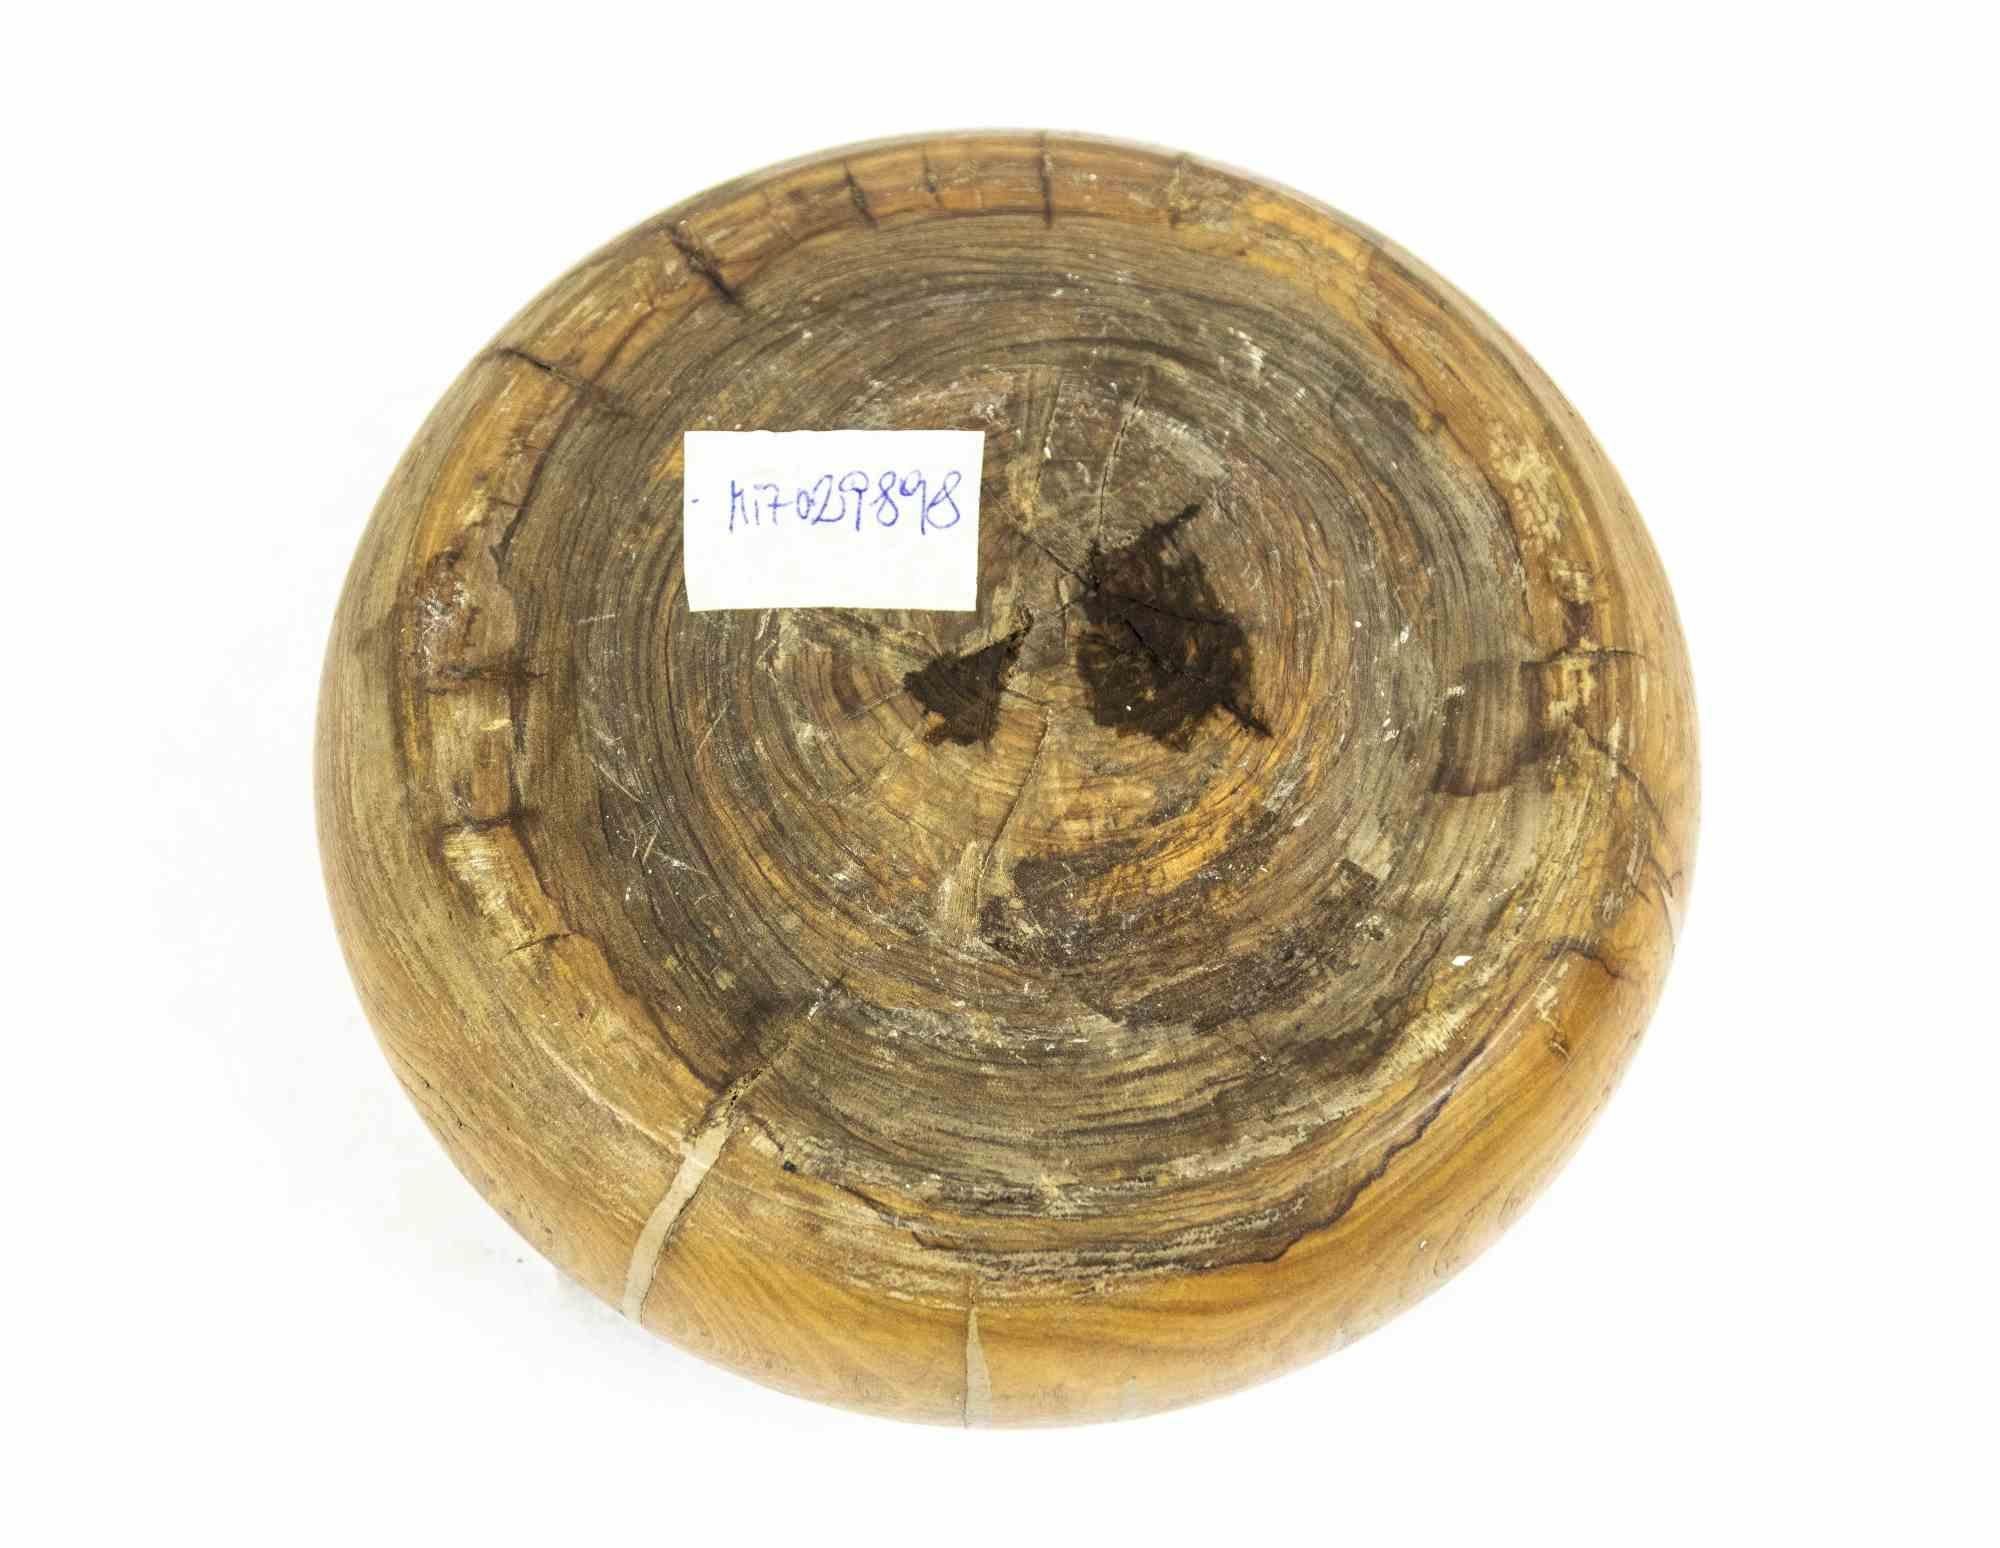 Wood exotic ashtray is an original decorative object realized in the mid-20th century.

An exotic wood ashtray in coconut tree wood perfect to enjoy relax moment.

Hand-made.

Mint conditions.